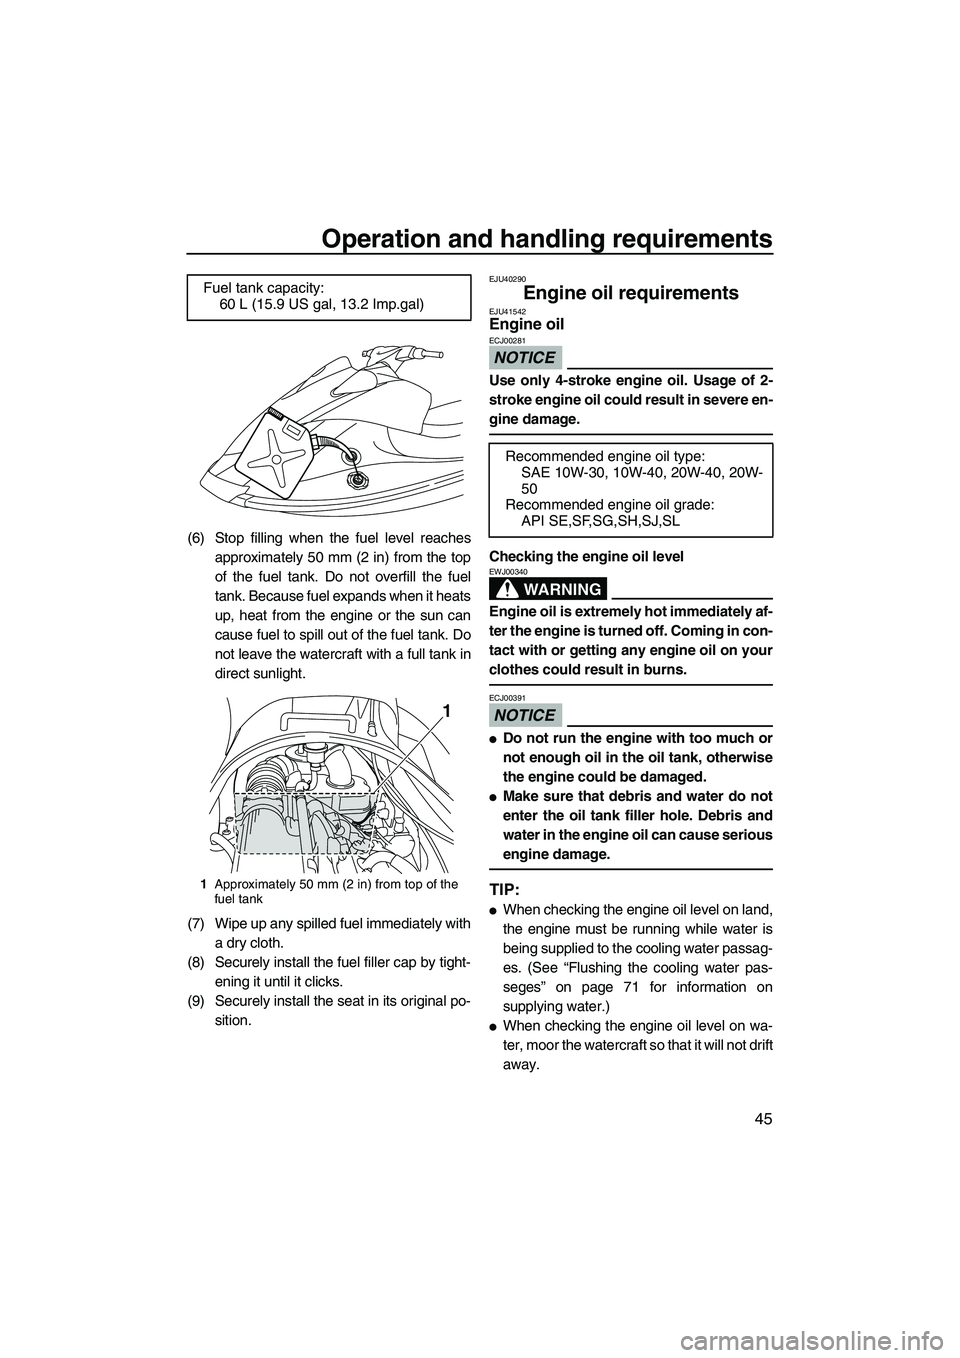 YAMAHA VX DELUXE 2012  Owners Manual Operation and handling requirements
45
(6) Stop filling when the fuel level reaches
approximately 50 mm (2 in) from the top
of the fuel tank. Do not overfill the fuel
tank. Because fuel expands when i